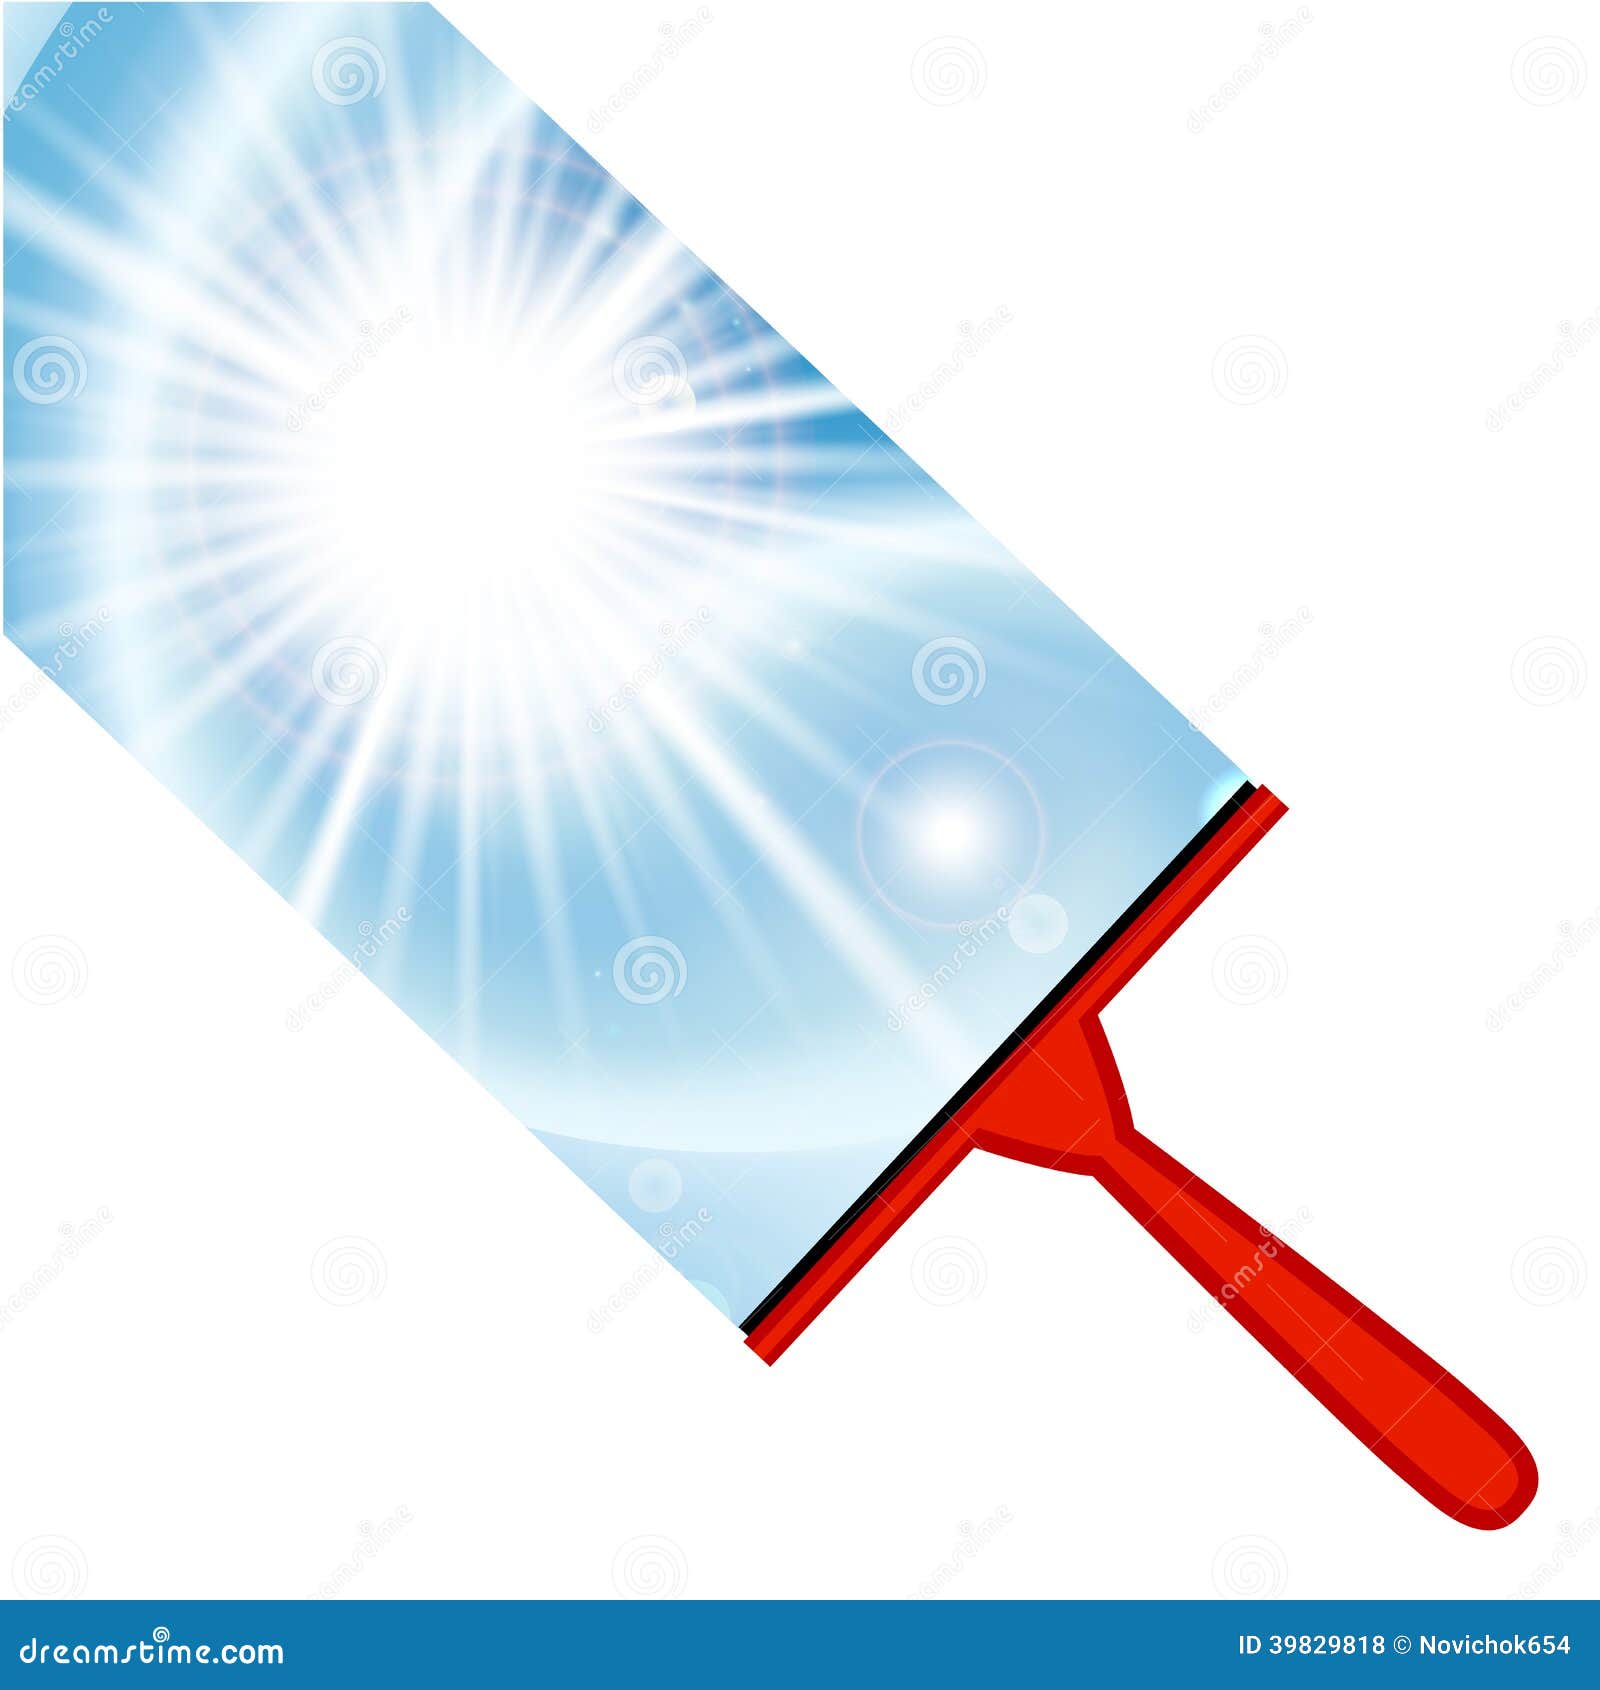 window squeegee clipart - photo #7